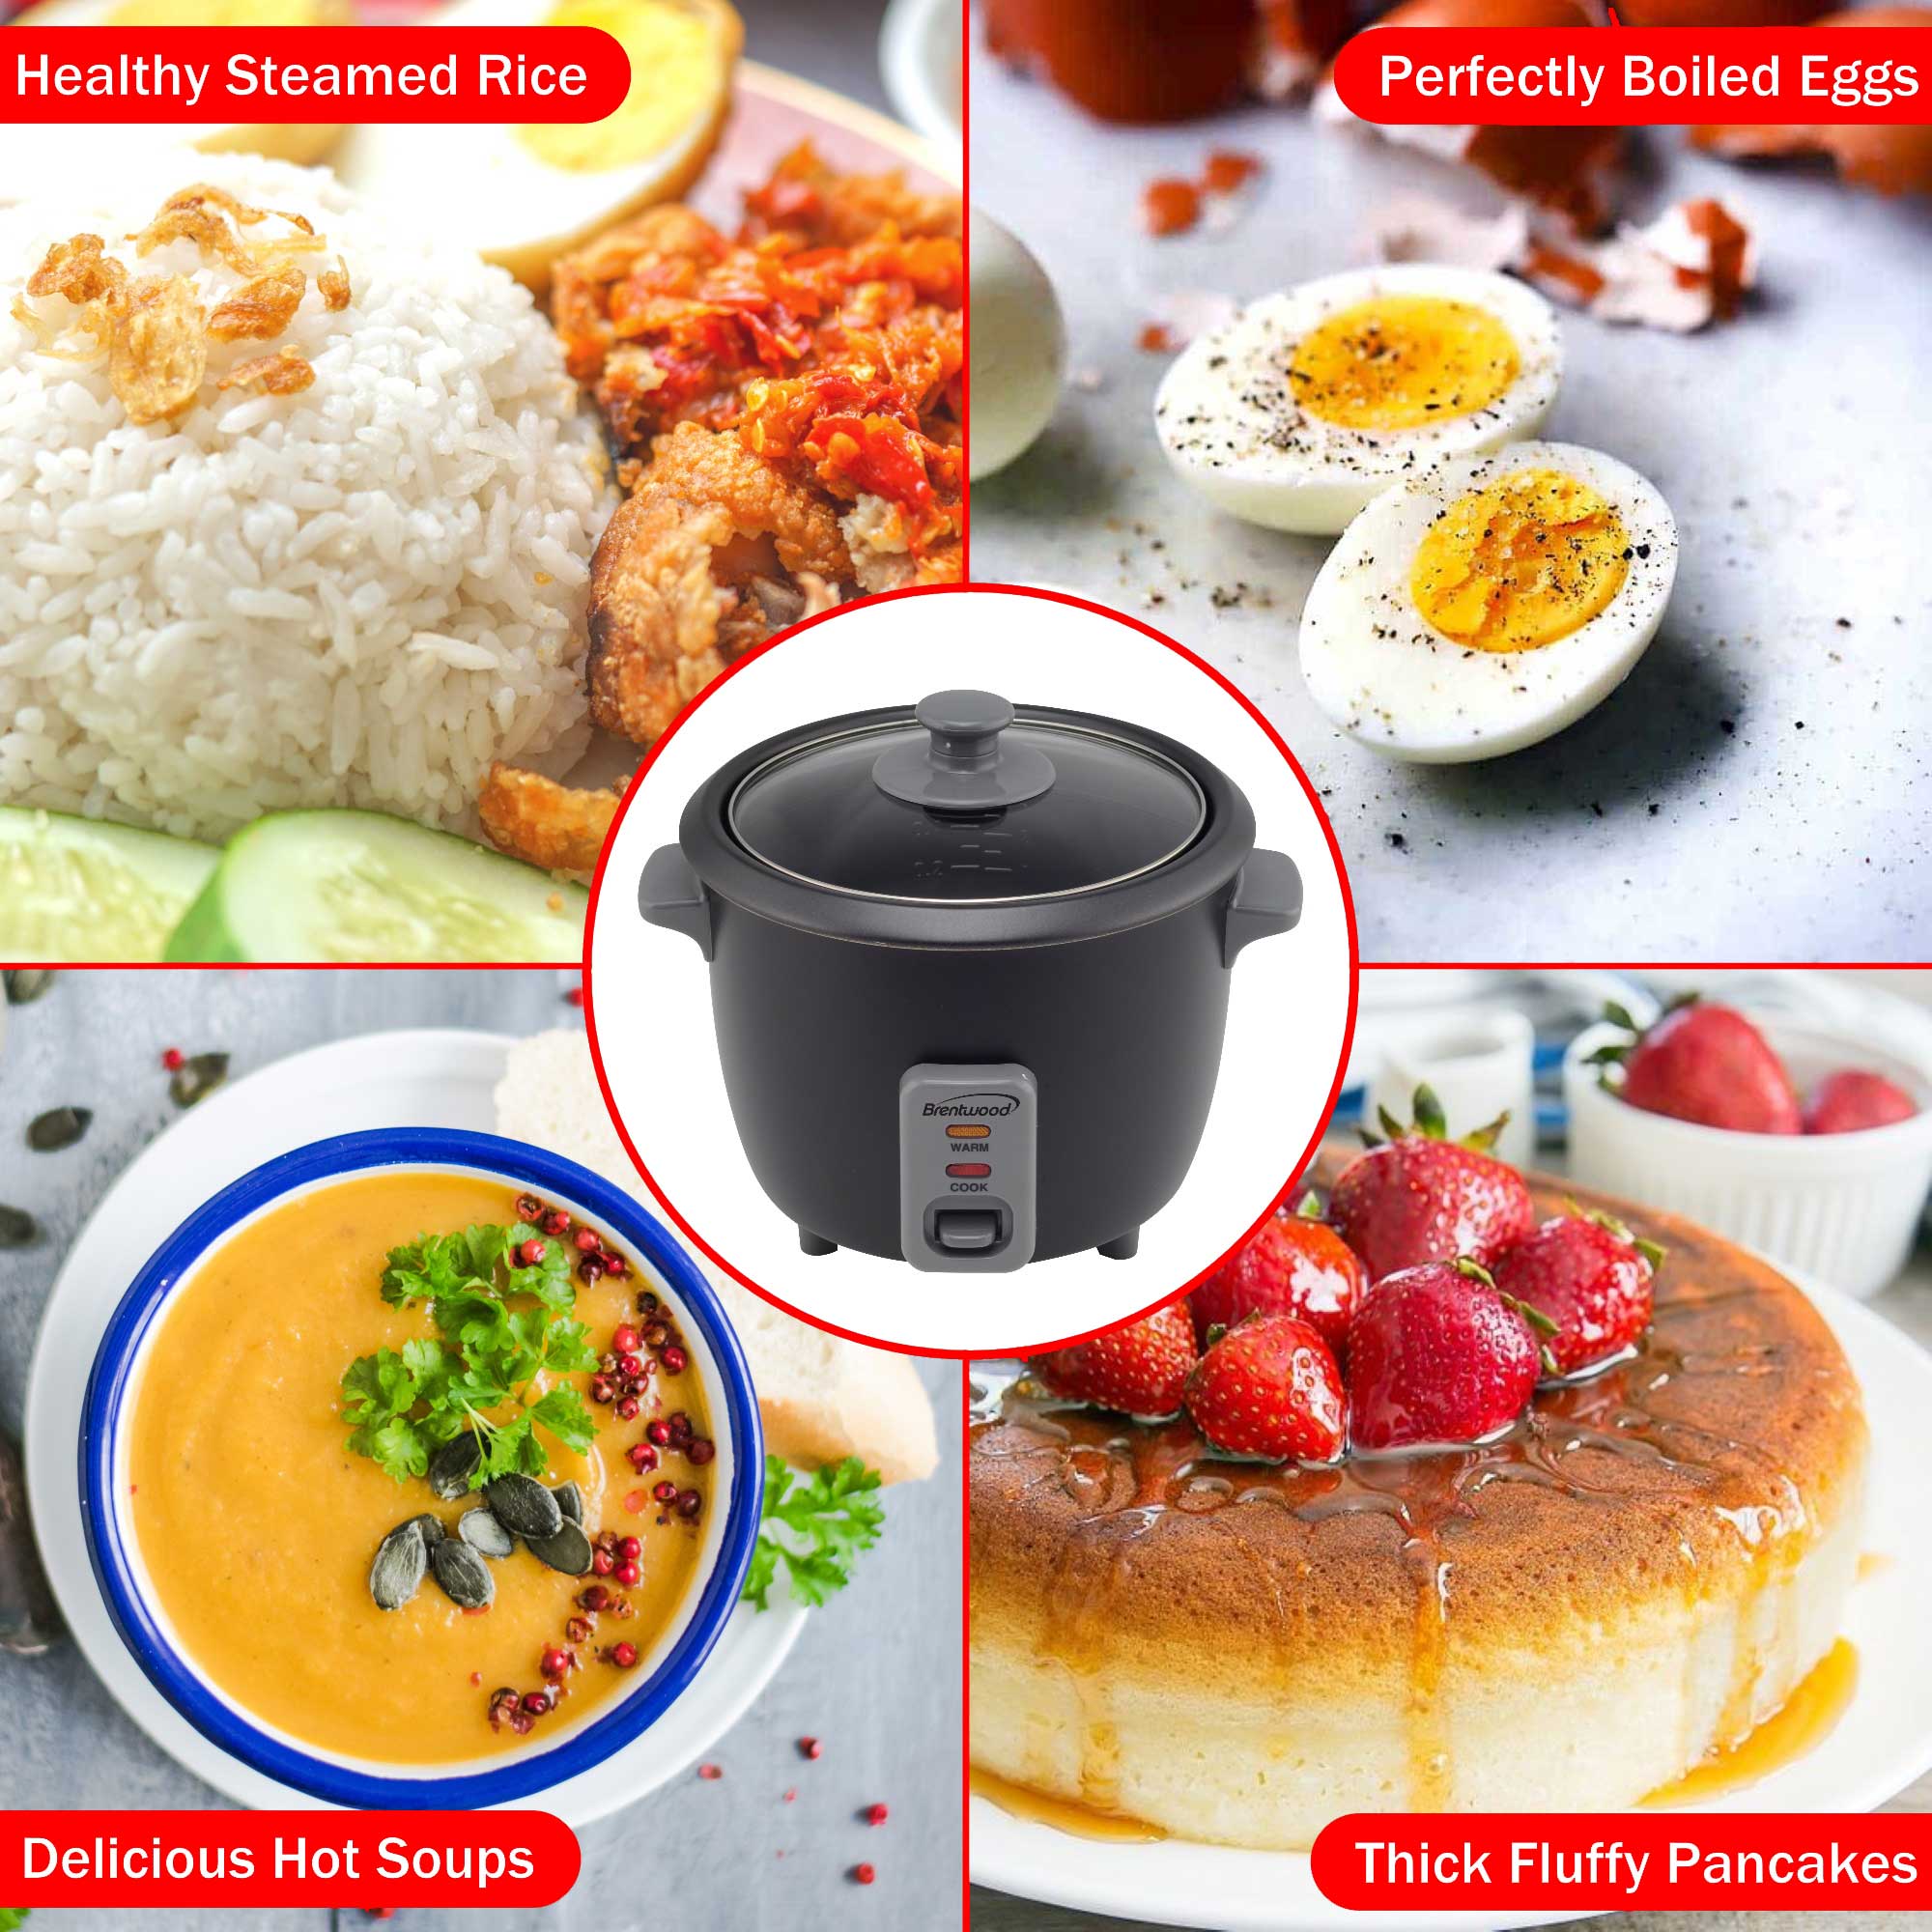 Egg Cookers - Brentwood Appliances